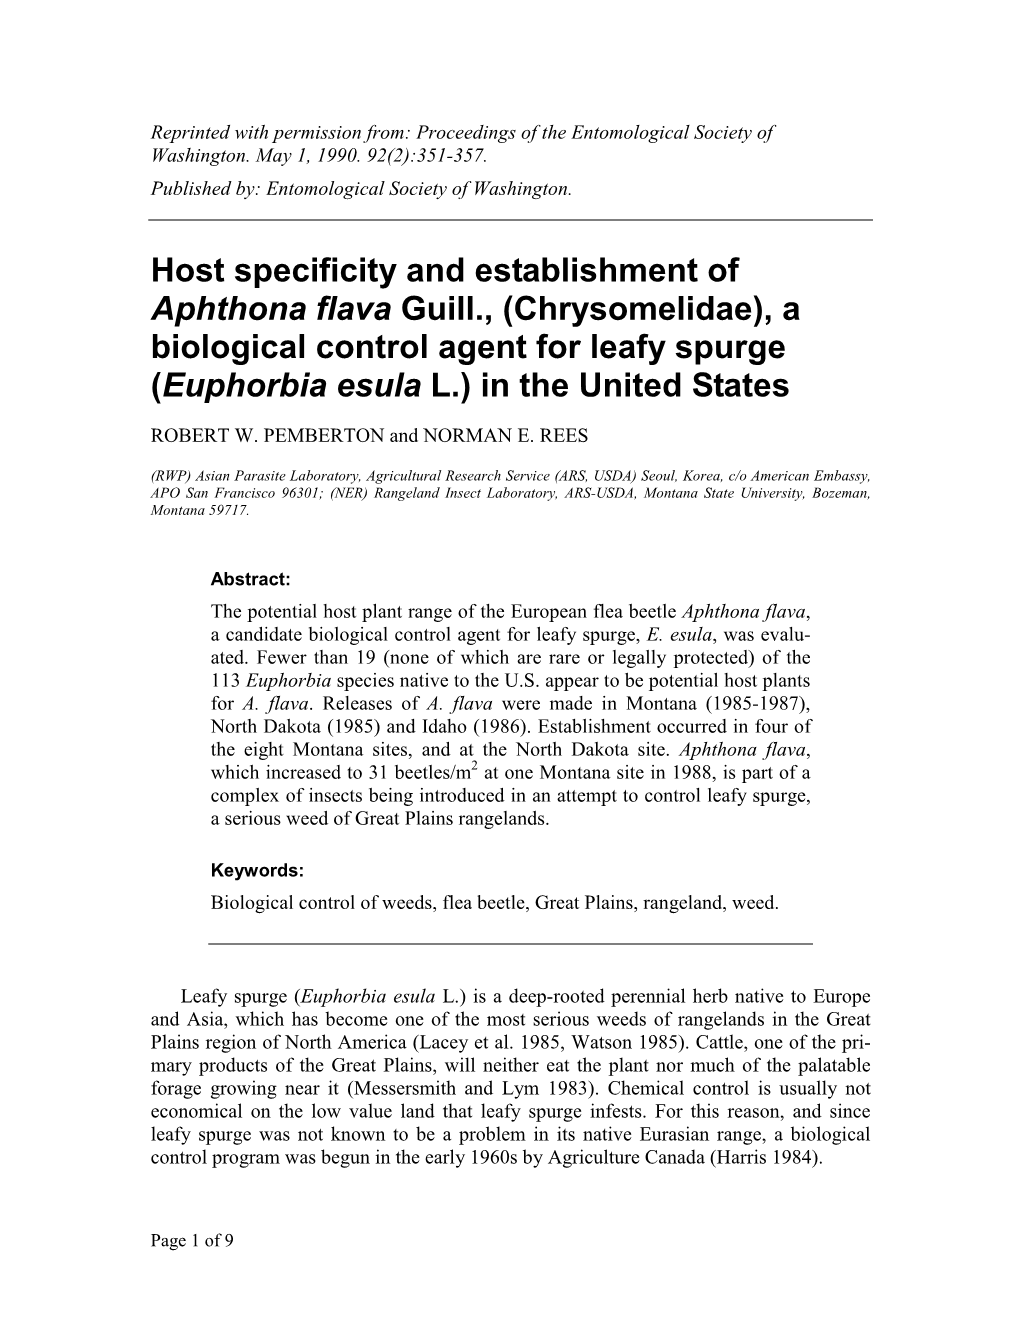 Host Specificity and Establishment of Aphthona Flava Guill., (Chrysomelidae), a Biological Control Agent for Leafy Spurge (Euphorbia Esula L.) in the United States